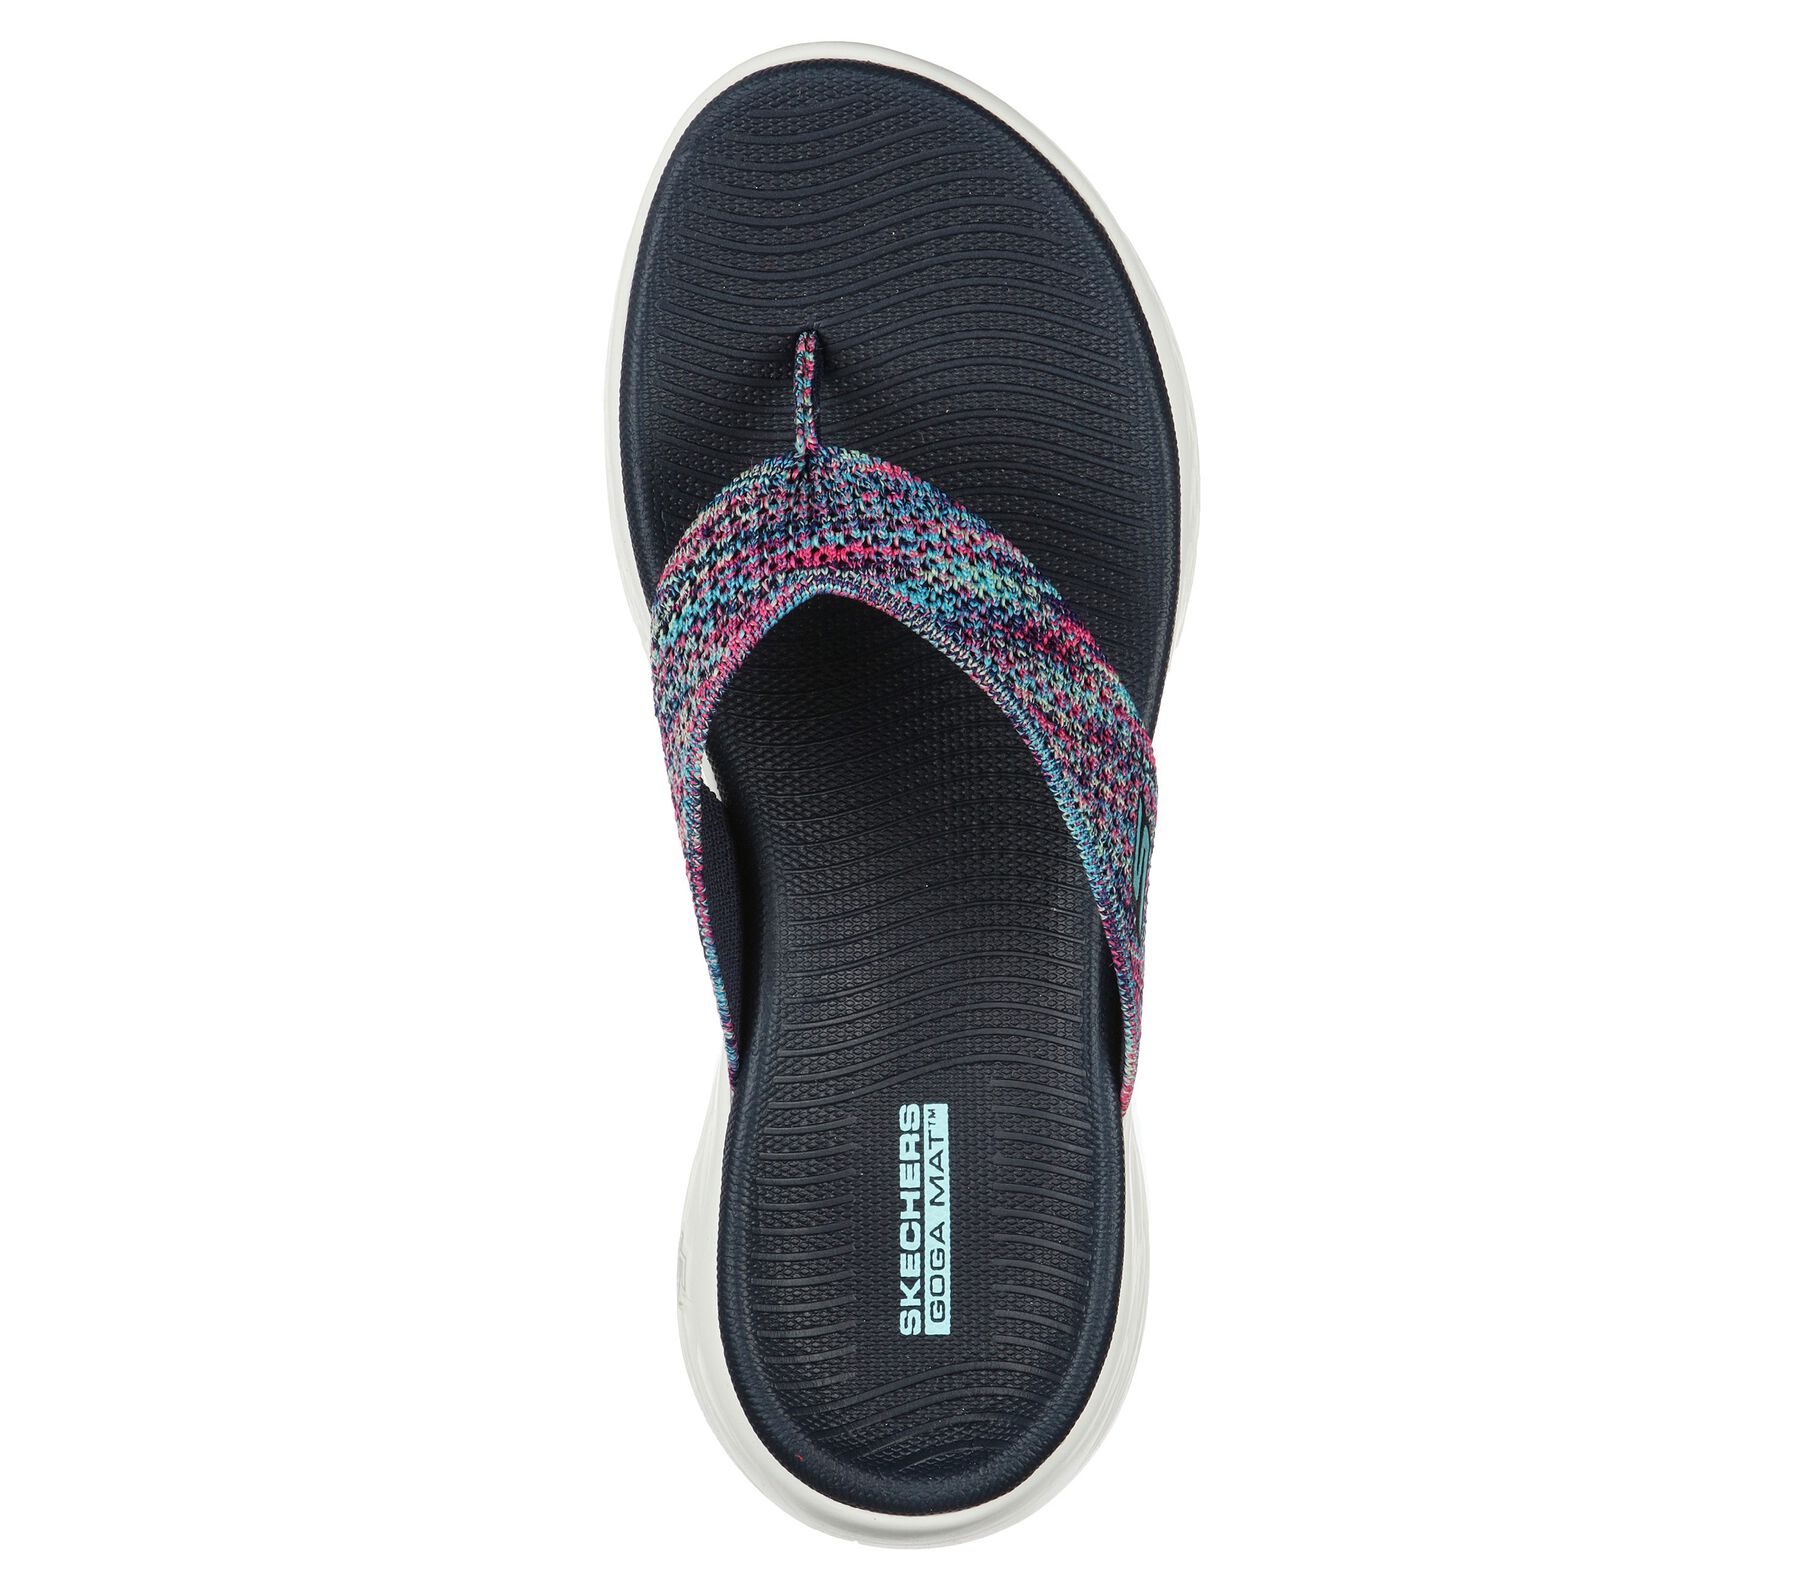 Shop the Skechers On the GO 600 - Paradise | SKECHERS